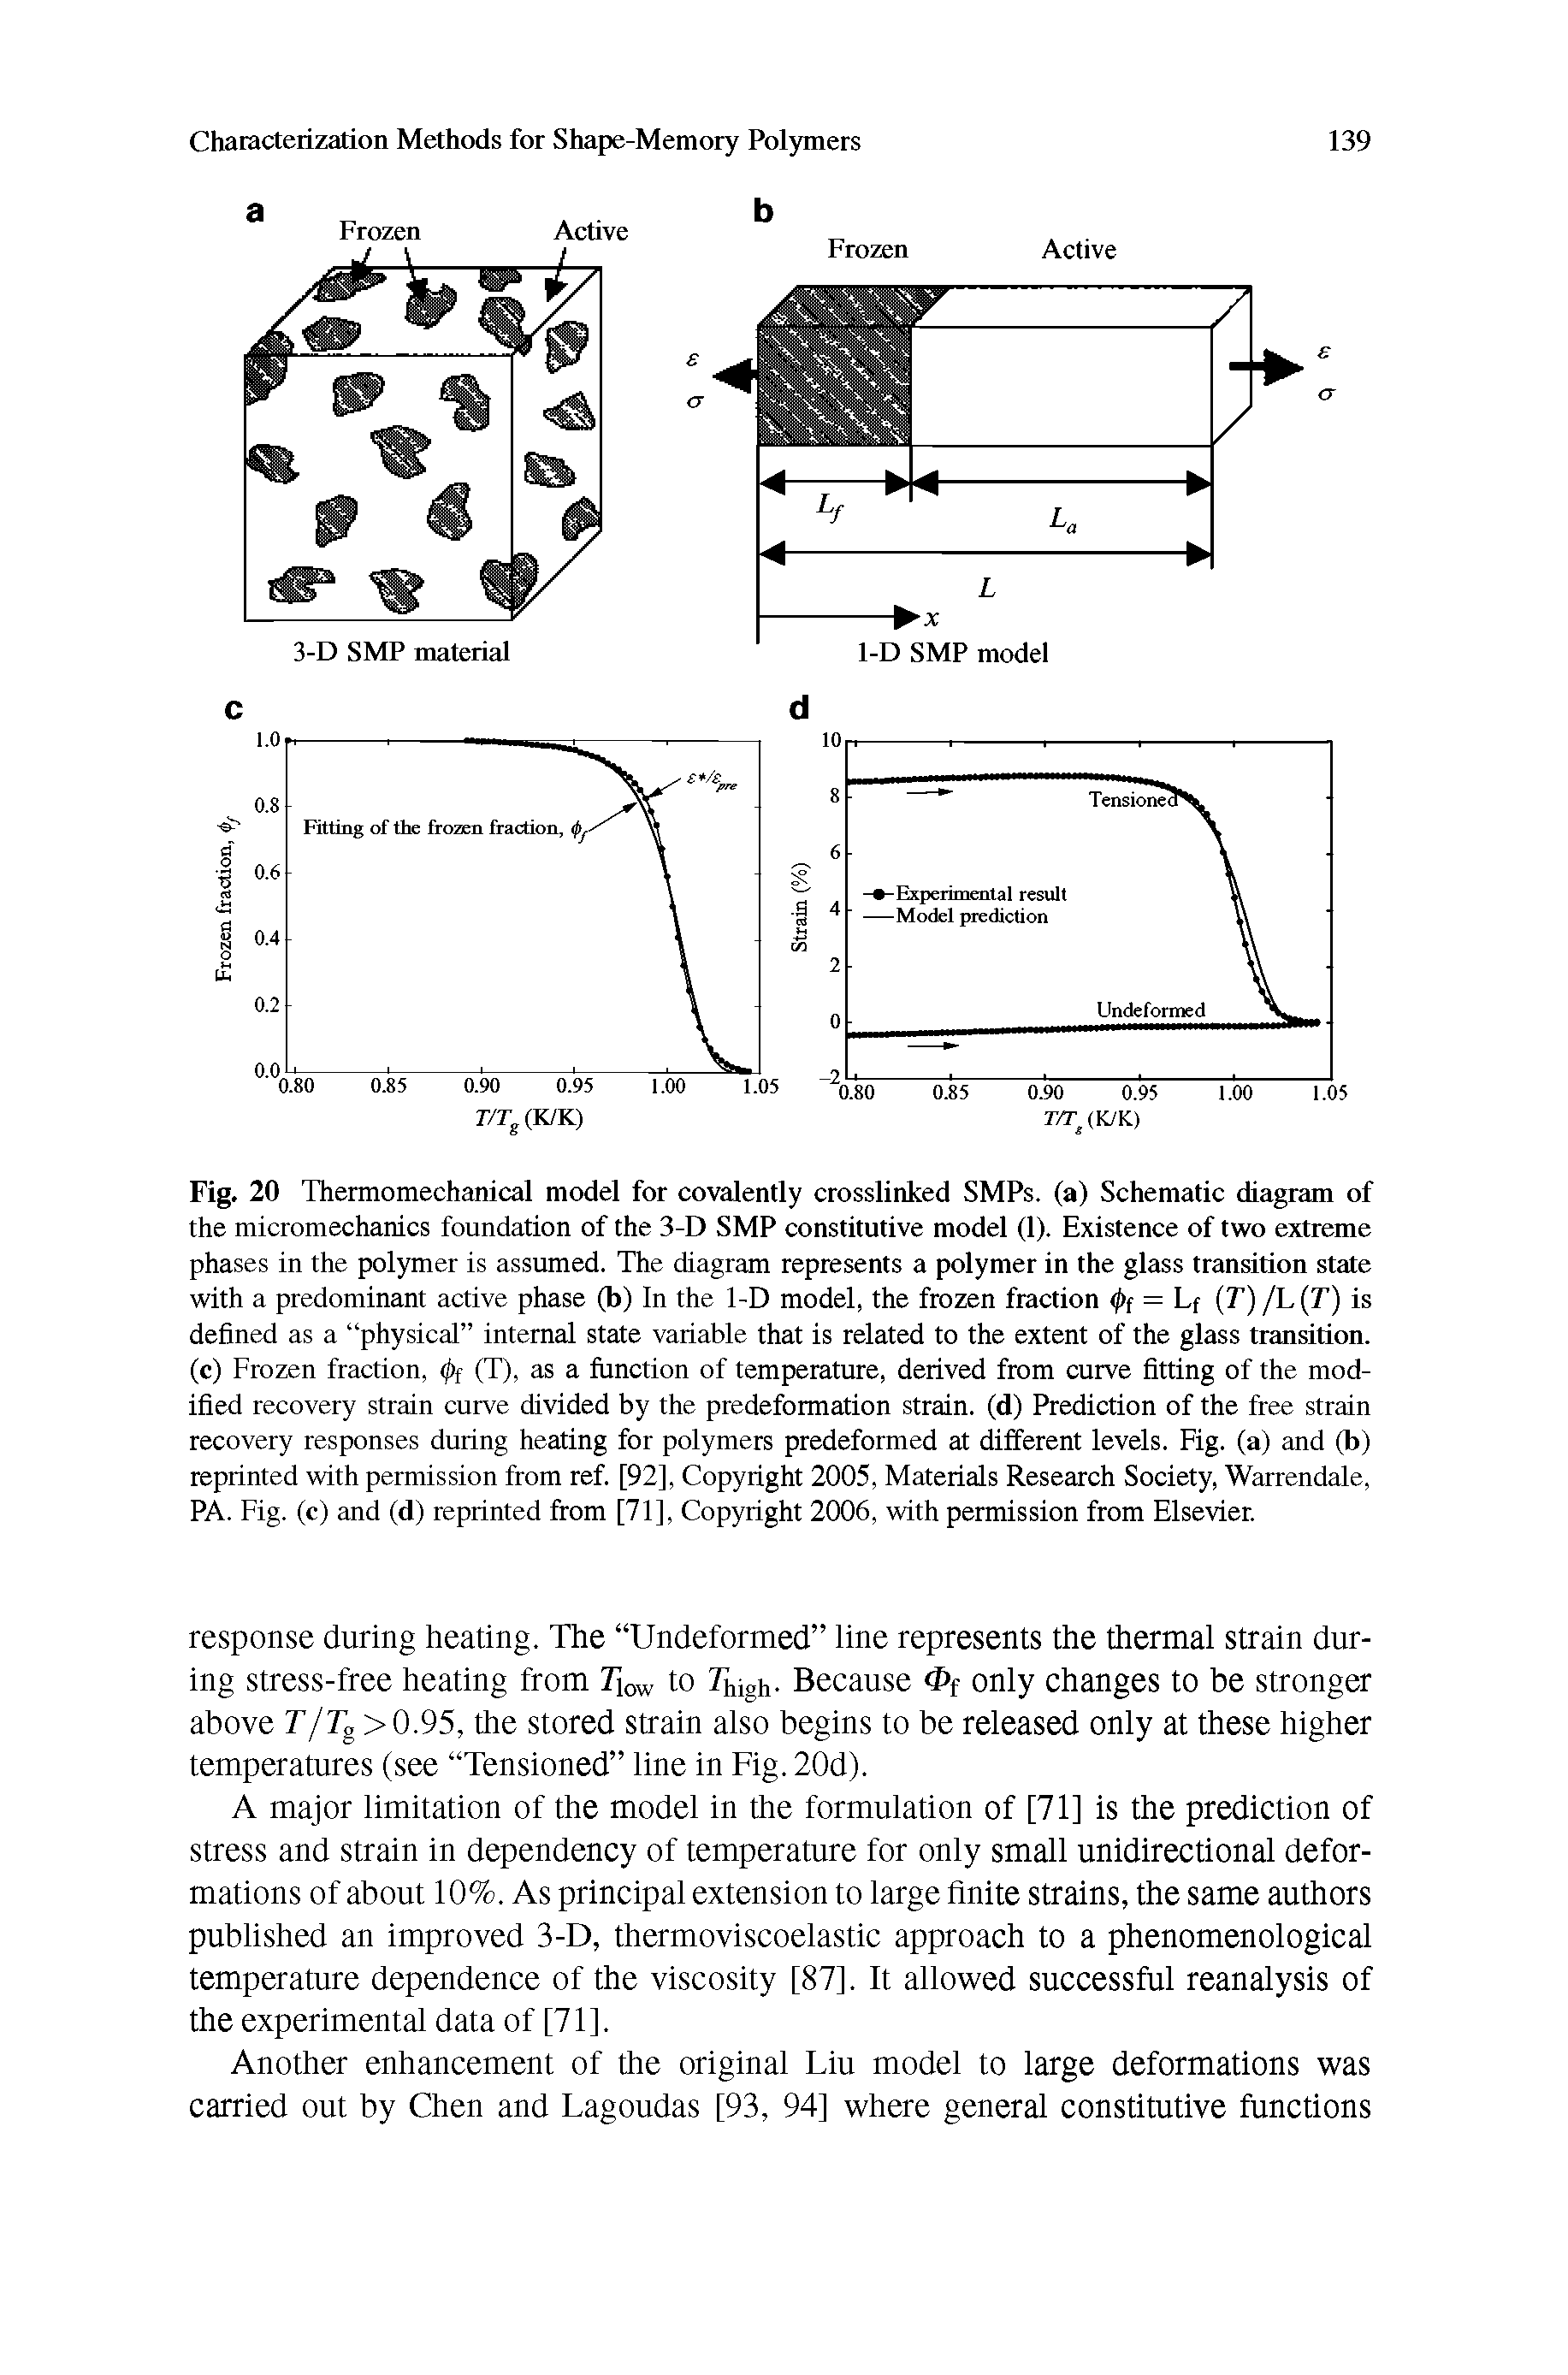 Fig. 20 Thermomechanical model for covalently crosslinked SMPs. (a) Schematic diagram of the micromechanics foundation of the 3-D SMP constitutive model (1). Existence of two extreme phases in the polymer is assumed. The diagram represents a polymer in the glass tiansition state with a predominant active phase (b) In the 1-D model, the frozen fraction (pf = Lf (T) /L(T) is defined as a physical internal state variable that is related to the extent of the glass transition, (c) Frozen fraction, (j>f (T), as a function of temperature, derived from curve fitting of the modified recovery strain curve divided by the predeformation strain, (d) Prediction of the free strain recovery responses during heating for polymers predeformed at different levels. Fig. (a) and (b) reprinted with permission from ref. [92], Copyright 2005, Materials Research Society, Warrendale, PA. Fig. (c) and (d) reprinted from [71], Copyright 2006, with permission from Elsevier.